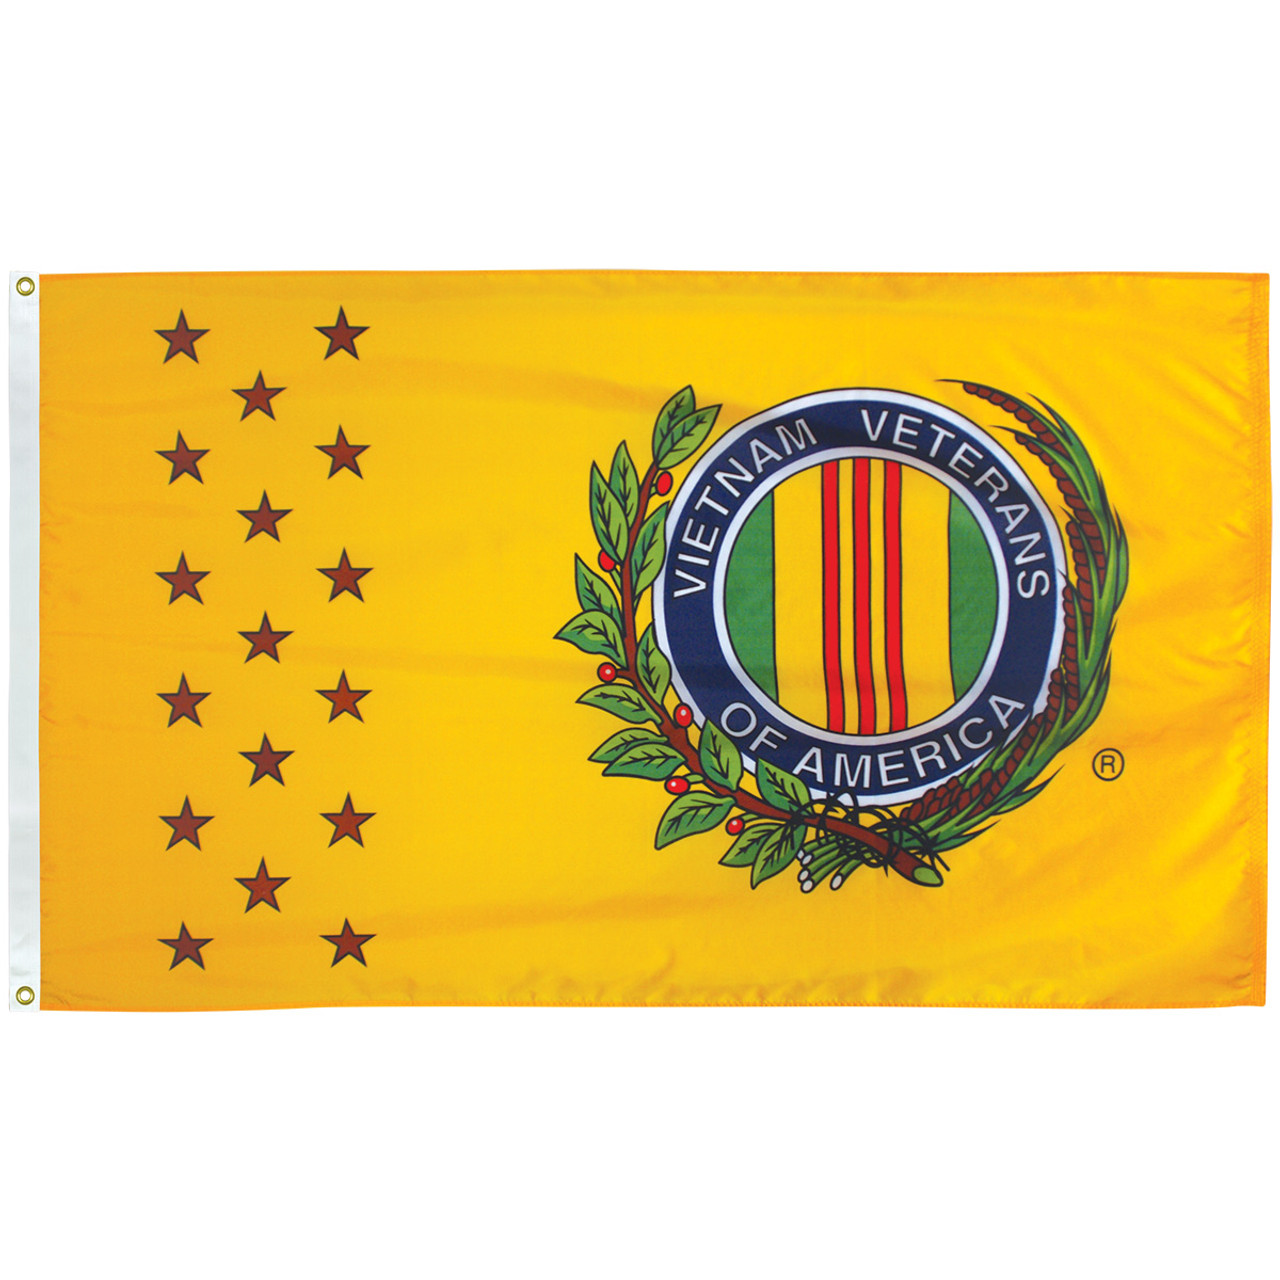 Vietnam Vets Service Flag, 3' x 5' Nylon with Header and Grommets